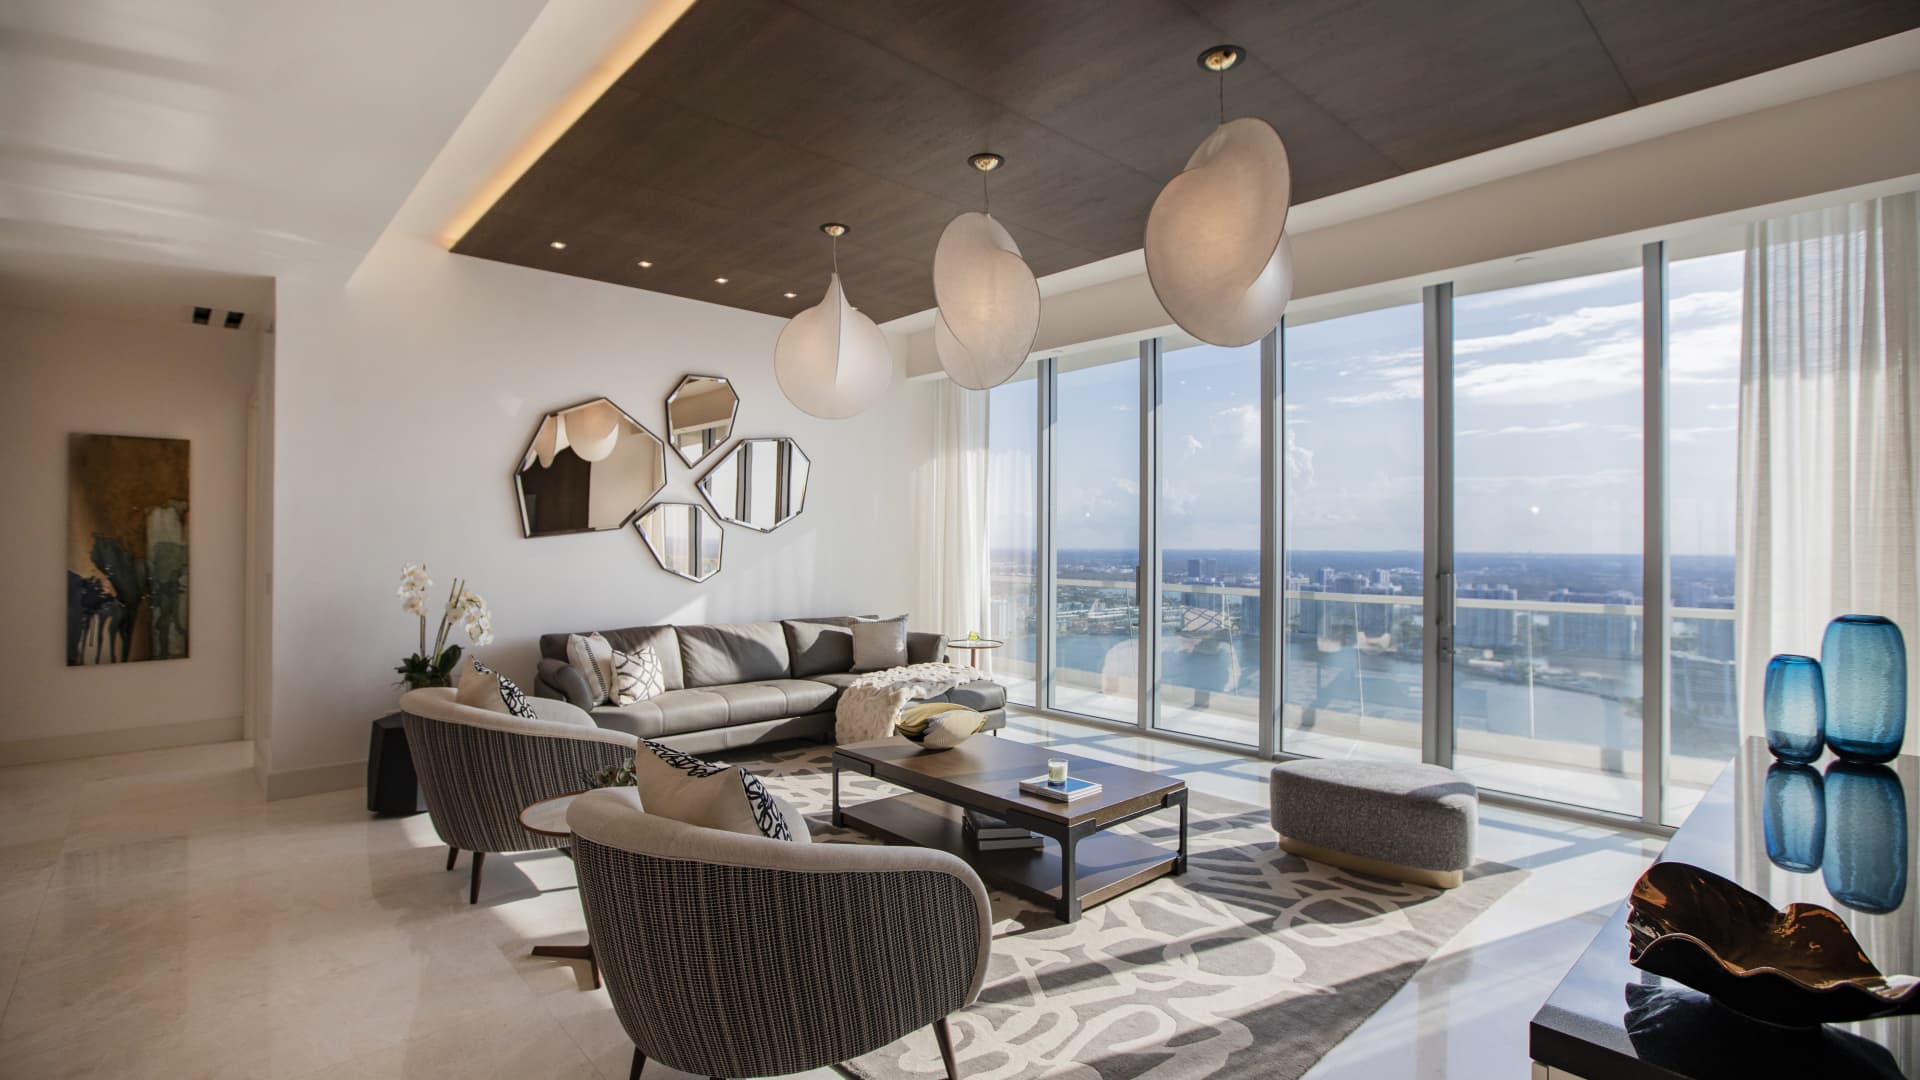 The family room and adjacent balcony that overloooks the Intracoastal Waterway.